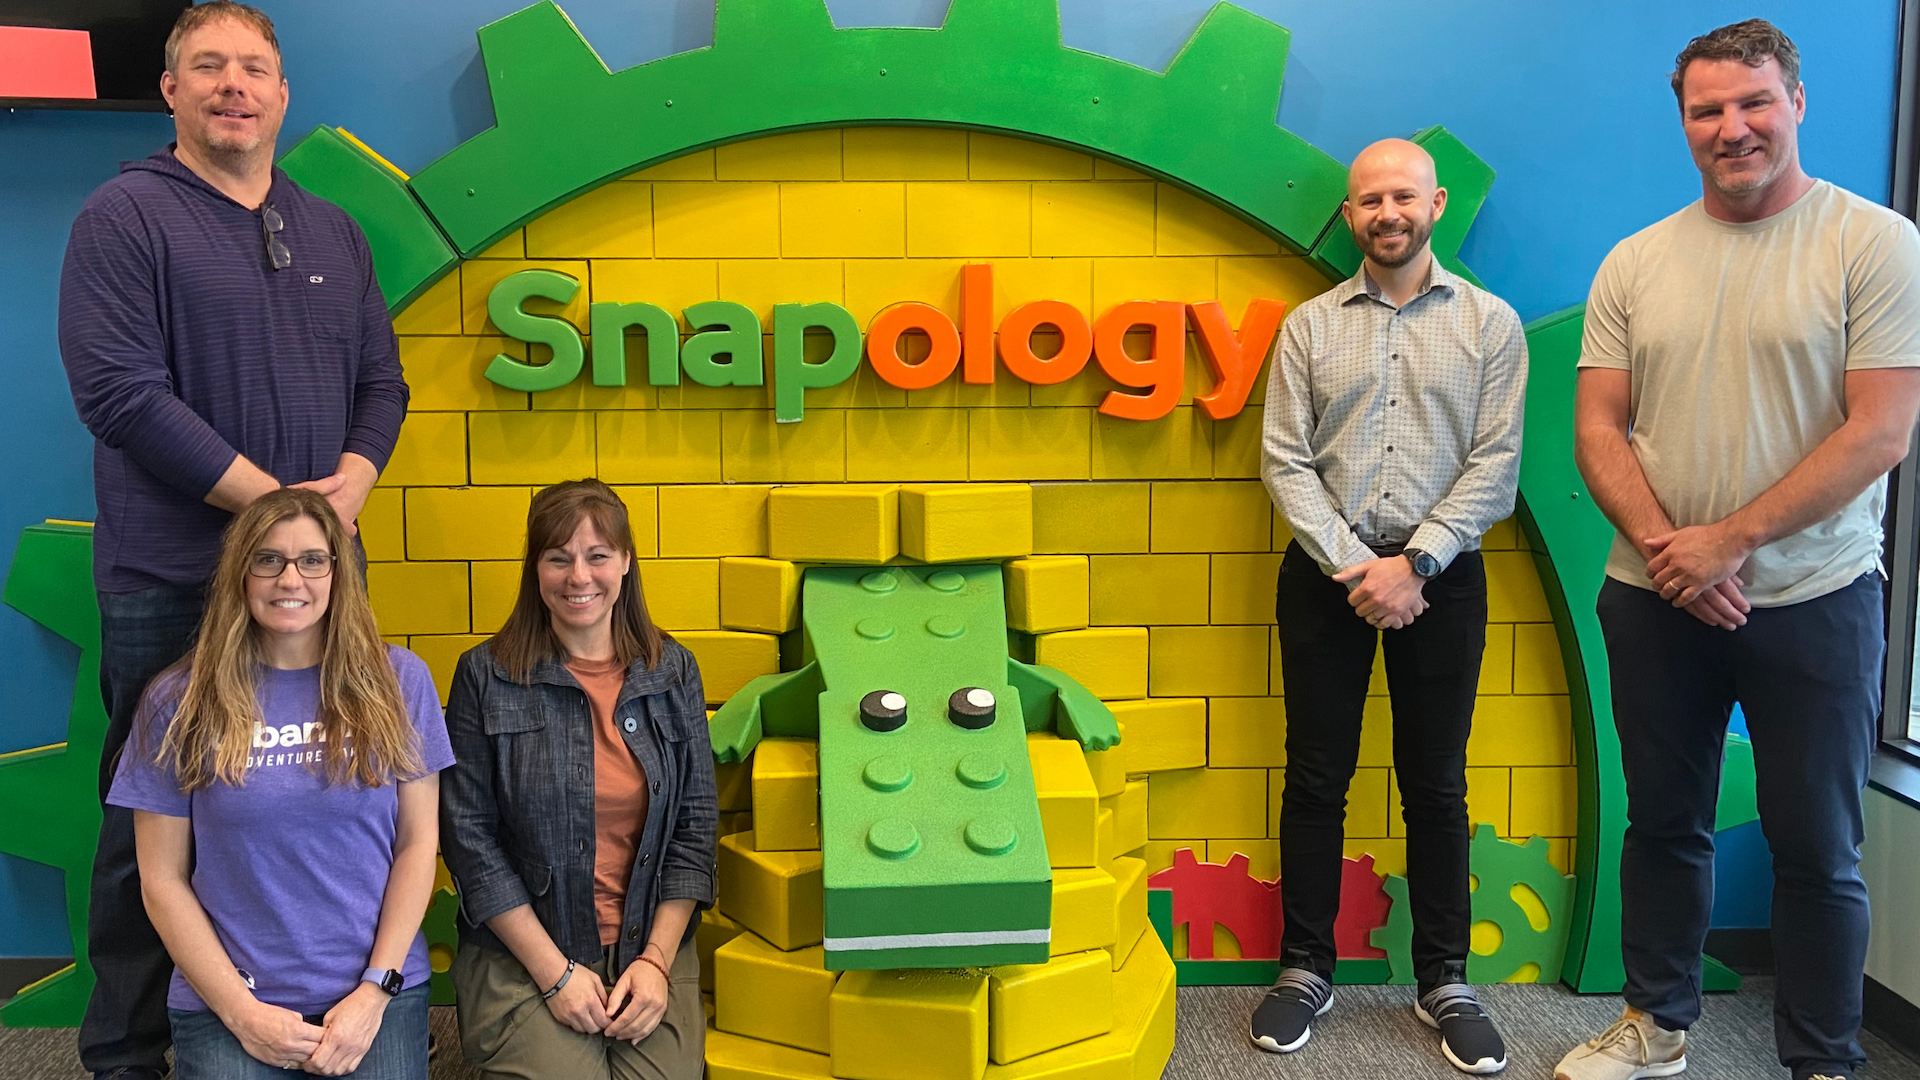 snapology staff members posing in front of a branded wall